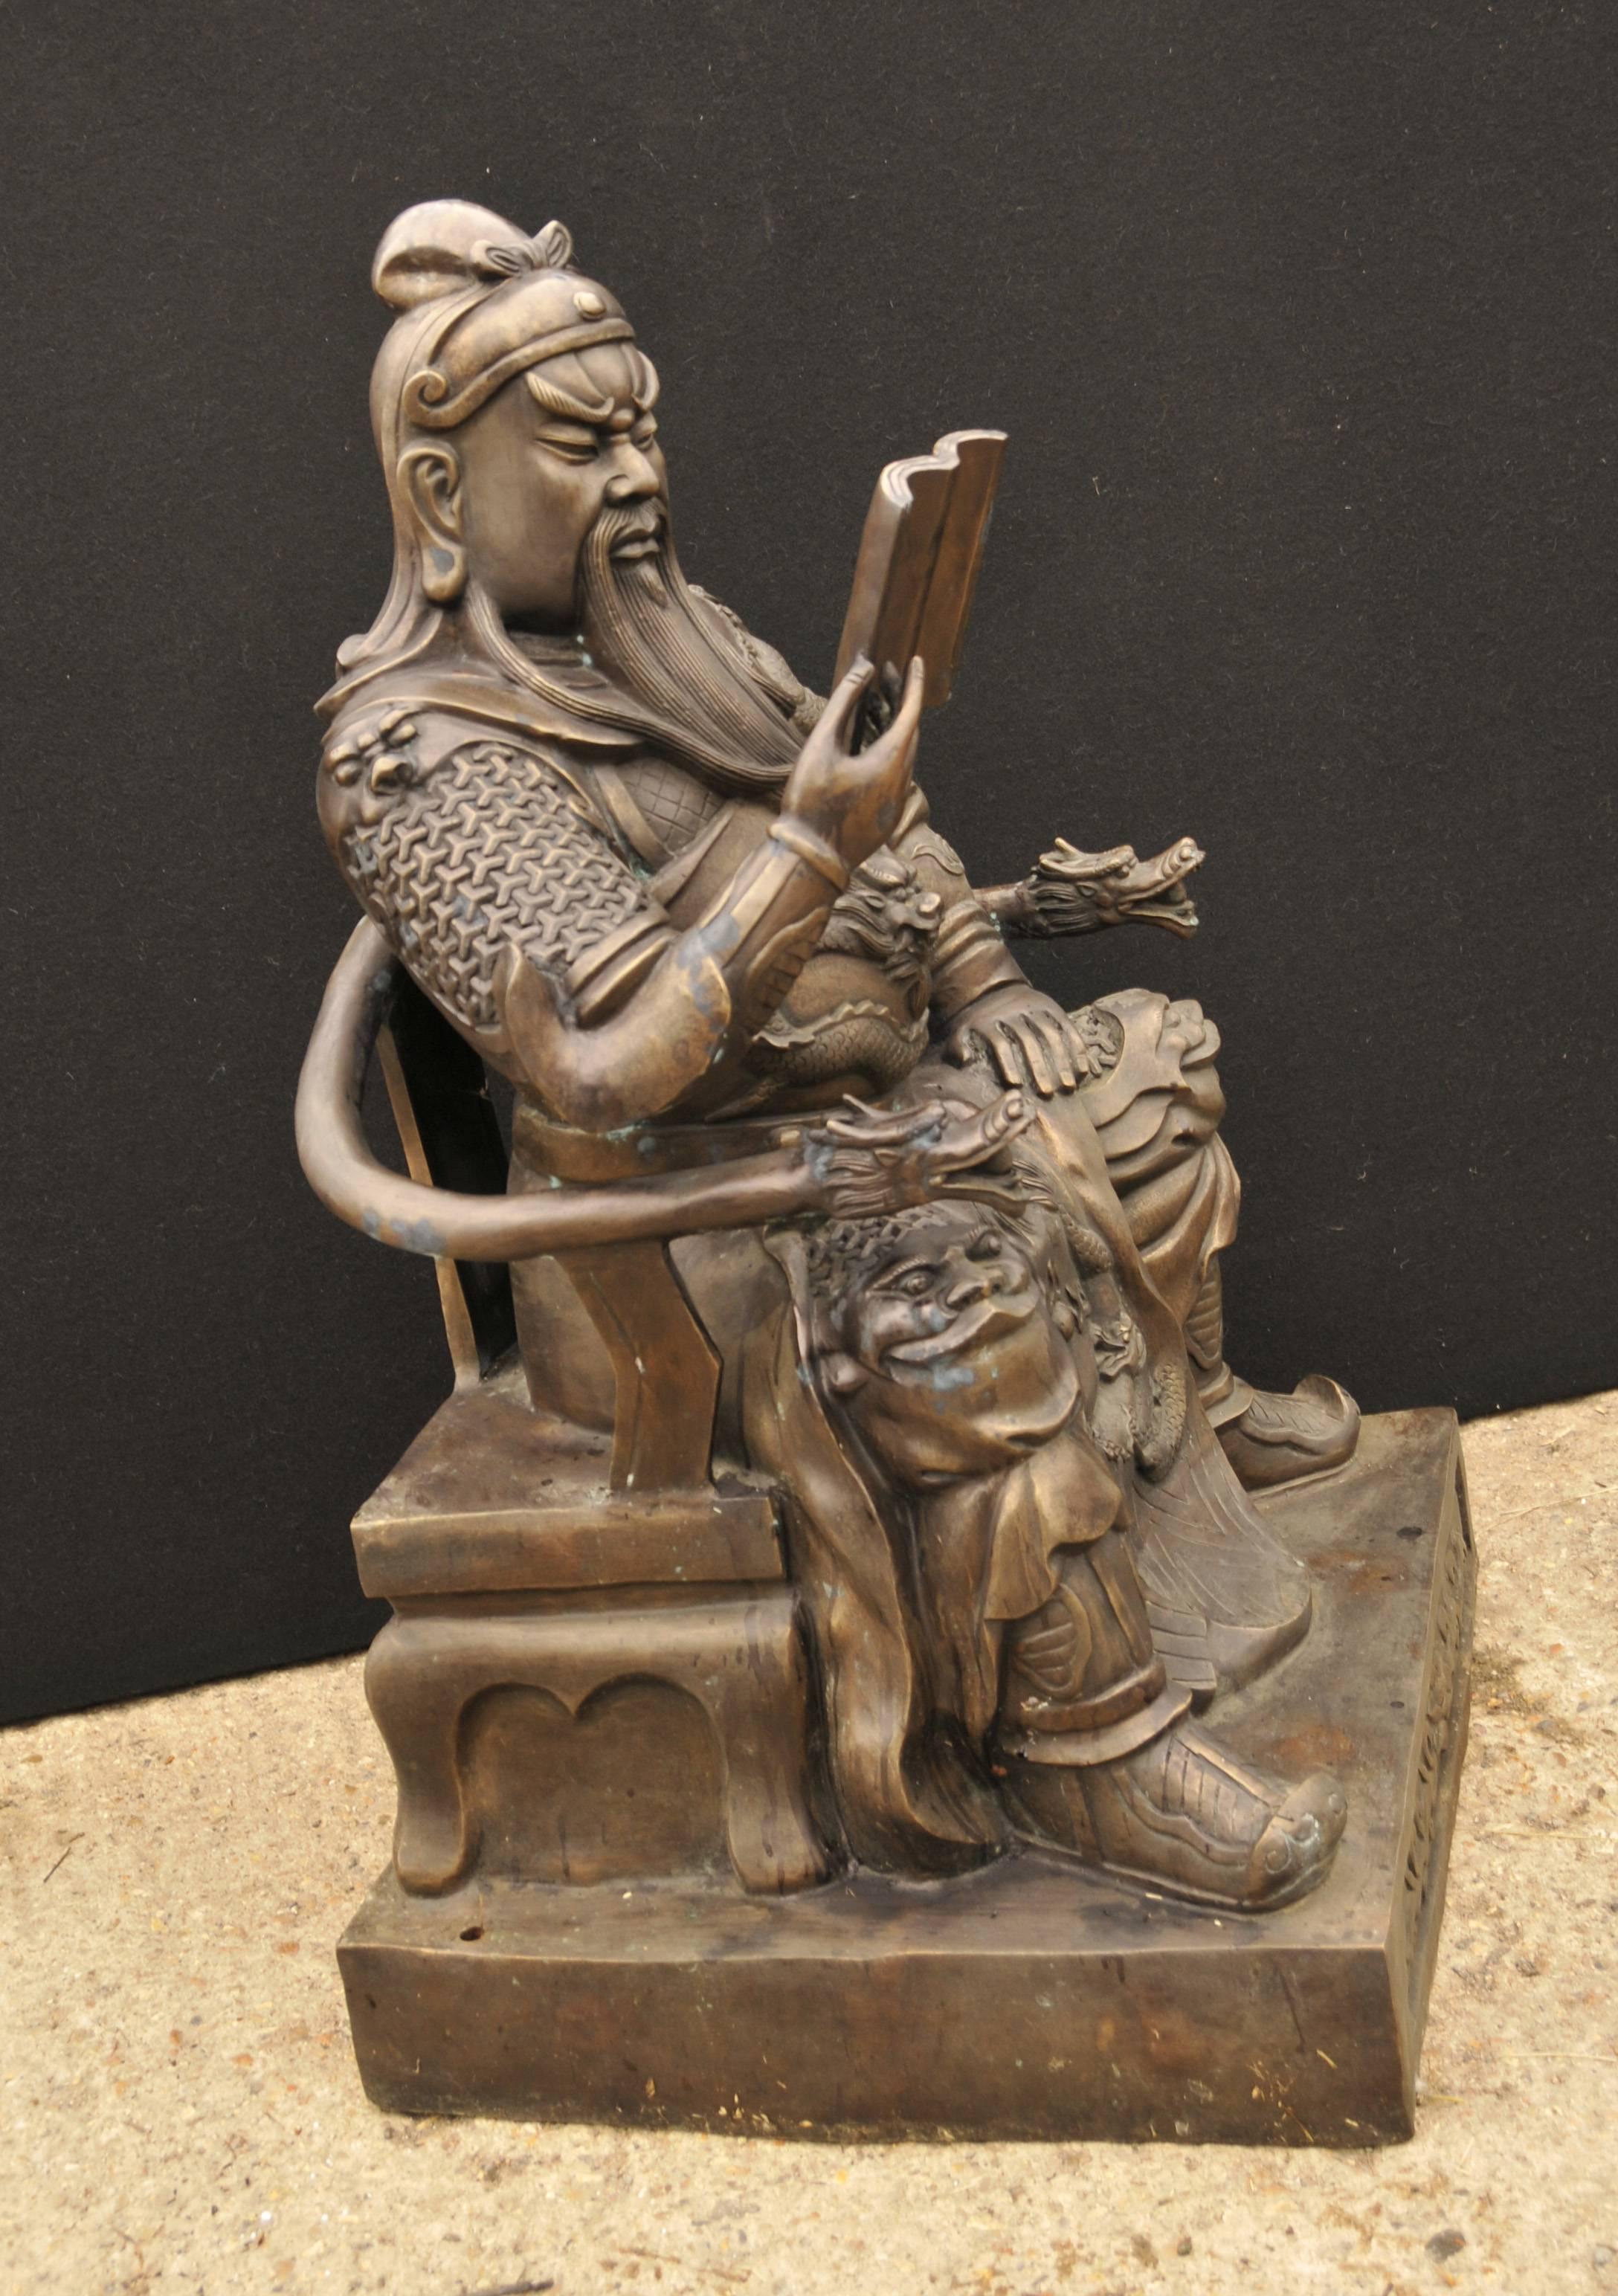 Stunning large bronze statue of a Japanese warrior reading.
Stands in at over four feet tall so of an architectural quality.
So well cast, just look at the details to his dress and facial expression.
Lovely patina to the bronze.
I love the